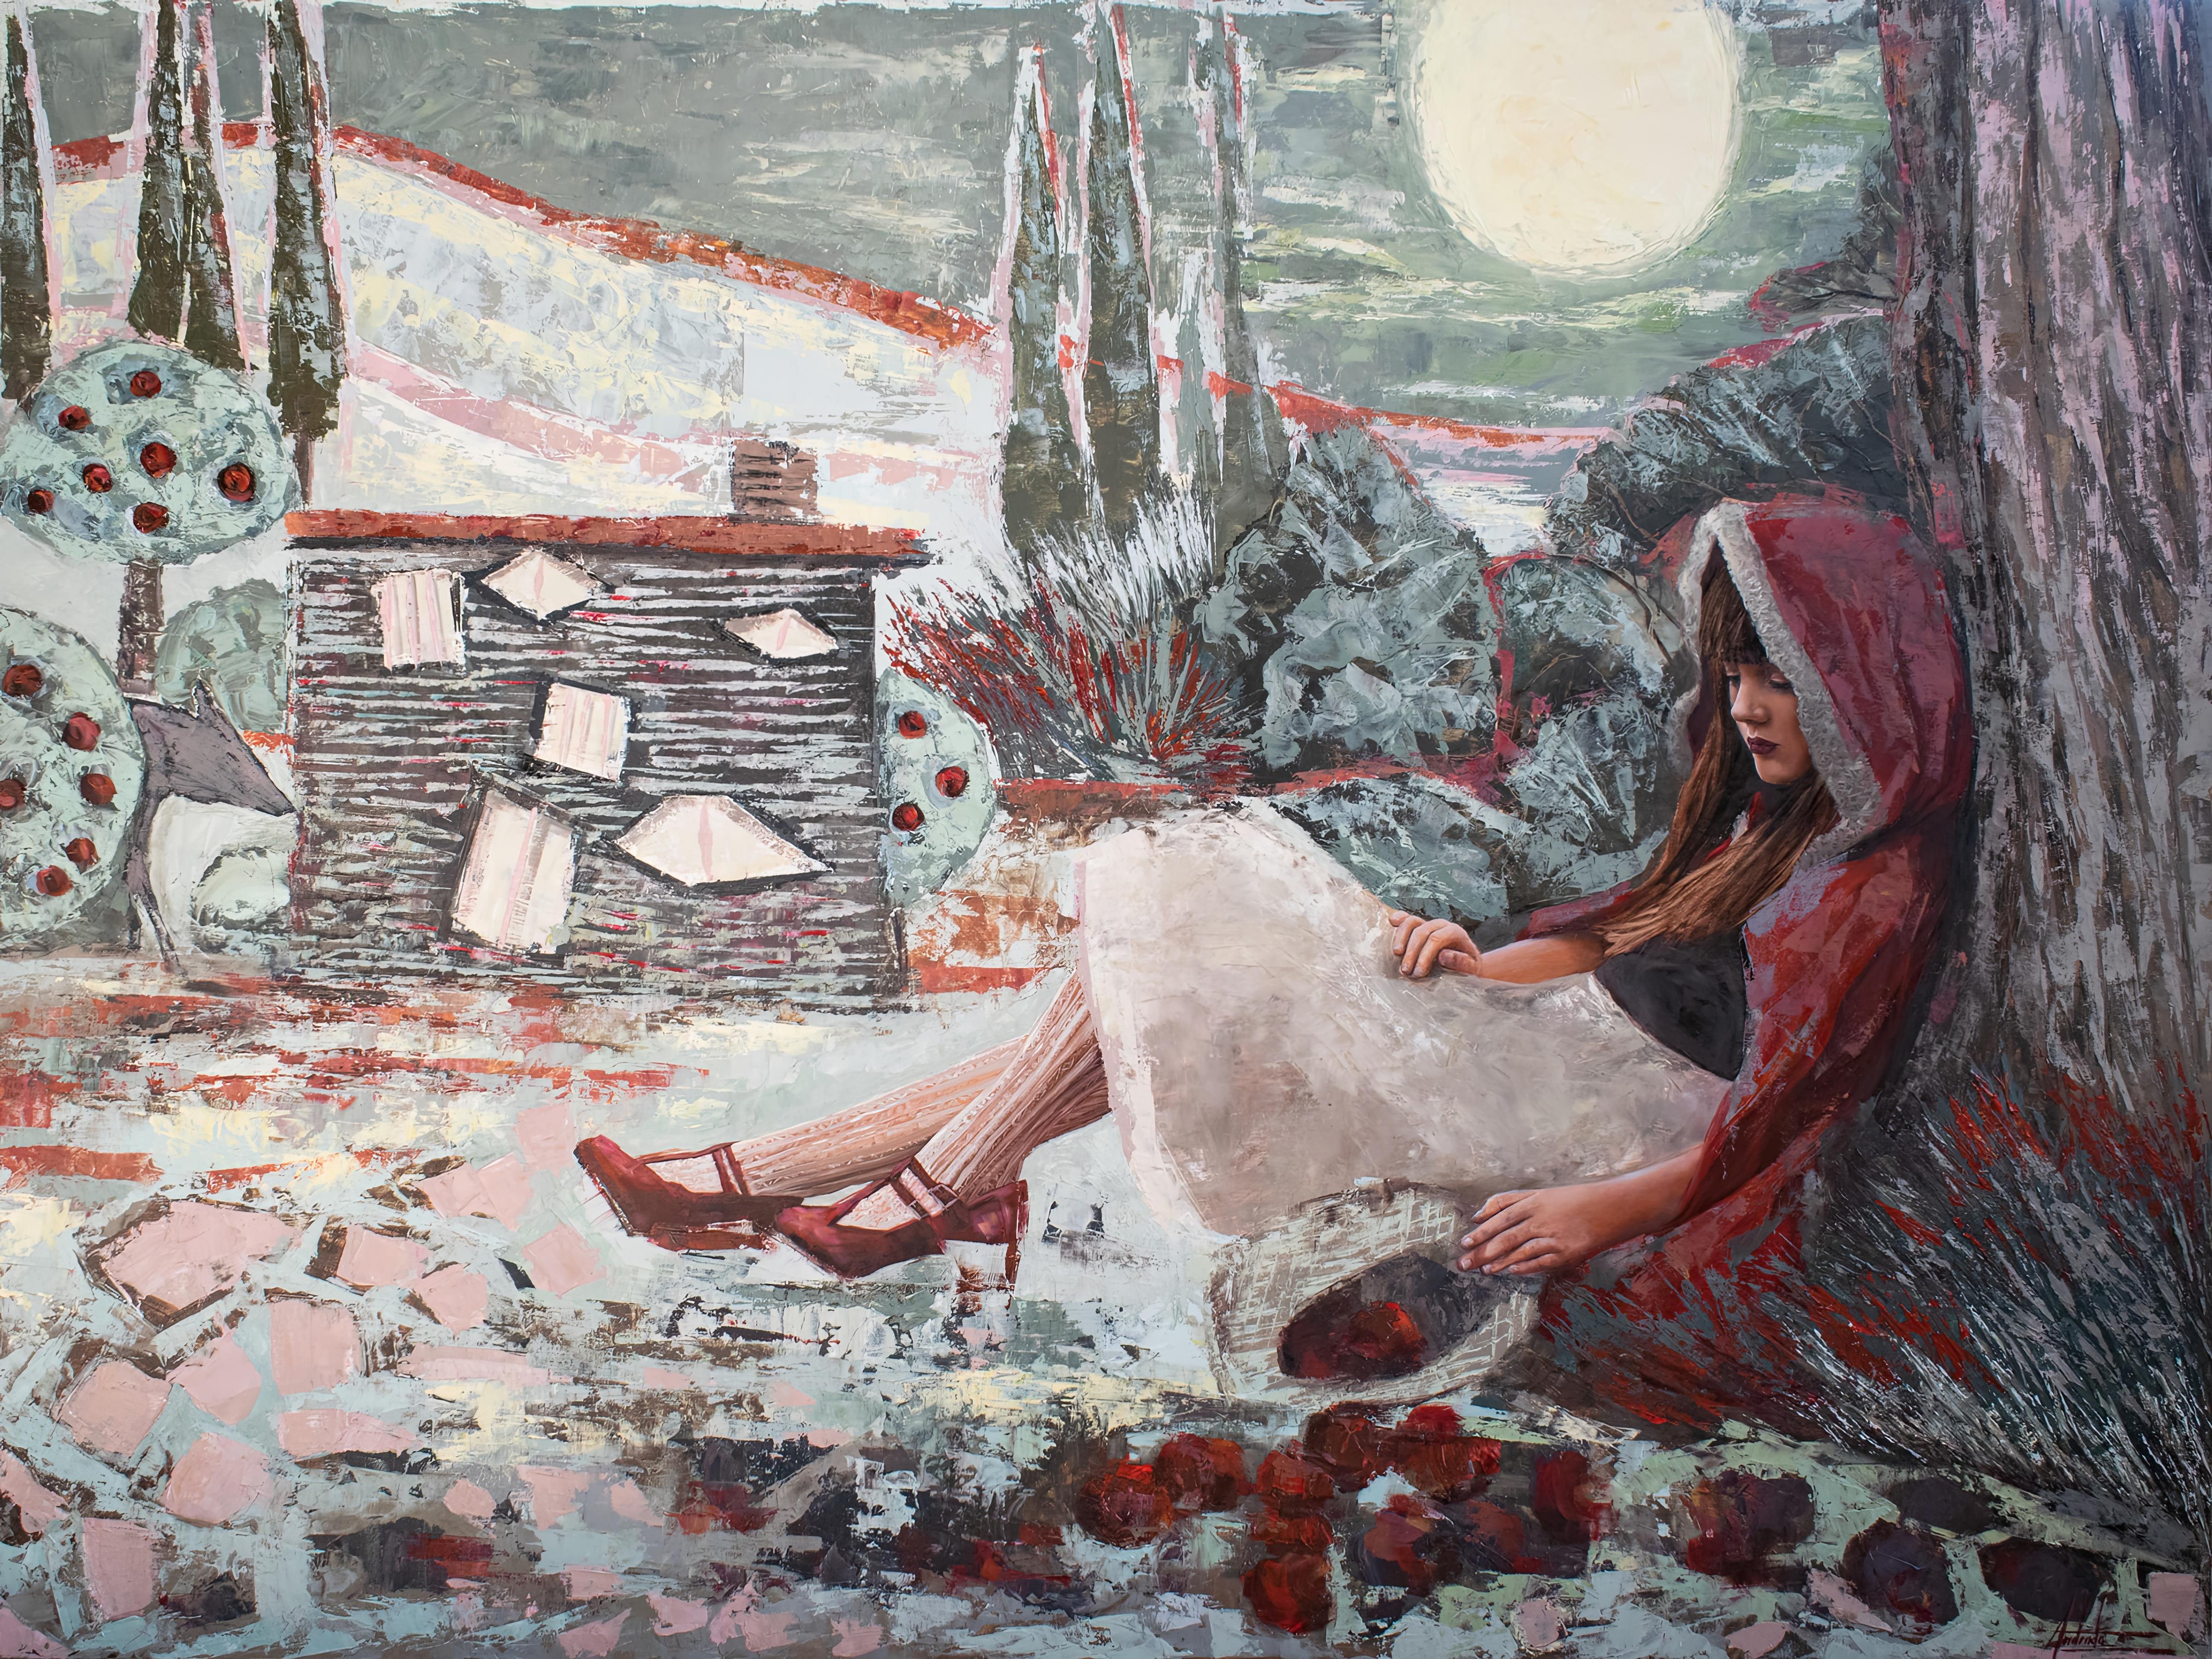 Explore the enchanting narrative of "Story of Red" by Andrada Trapnell, a 2023 mixed media creation that invokes the timeless tale of Red Riding Hood. This original artwork, measuring 30 x 40 inches, is masterfully rendered on board and comes